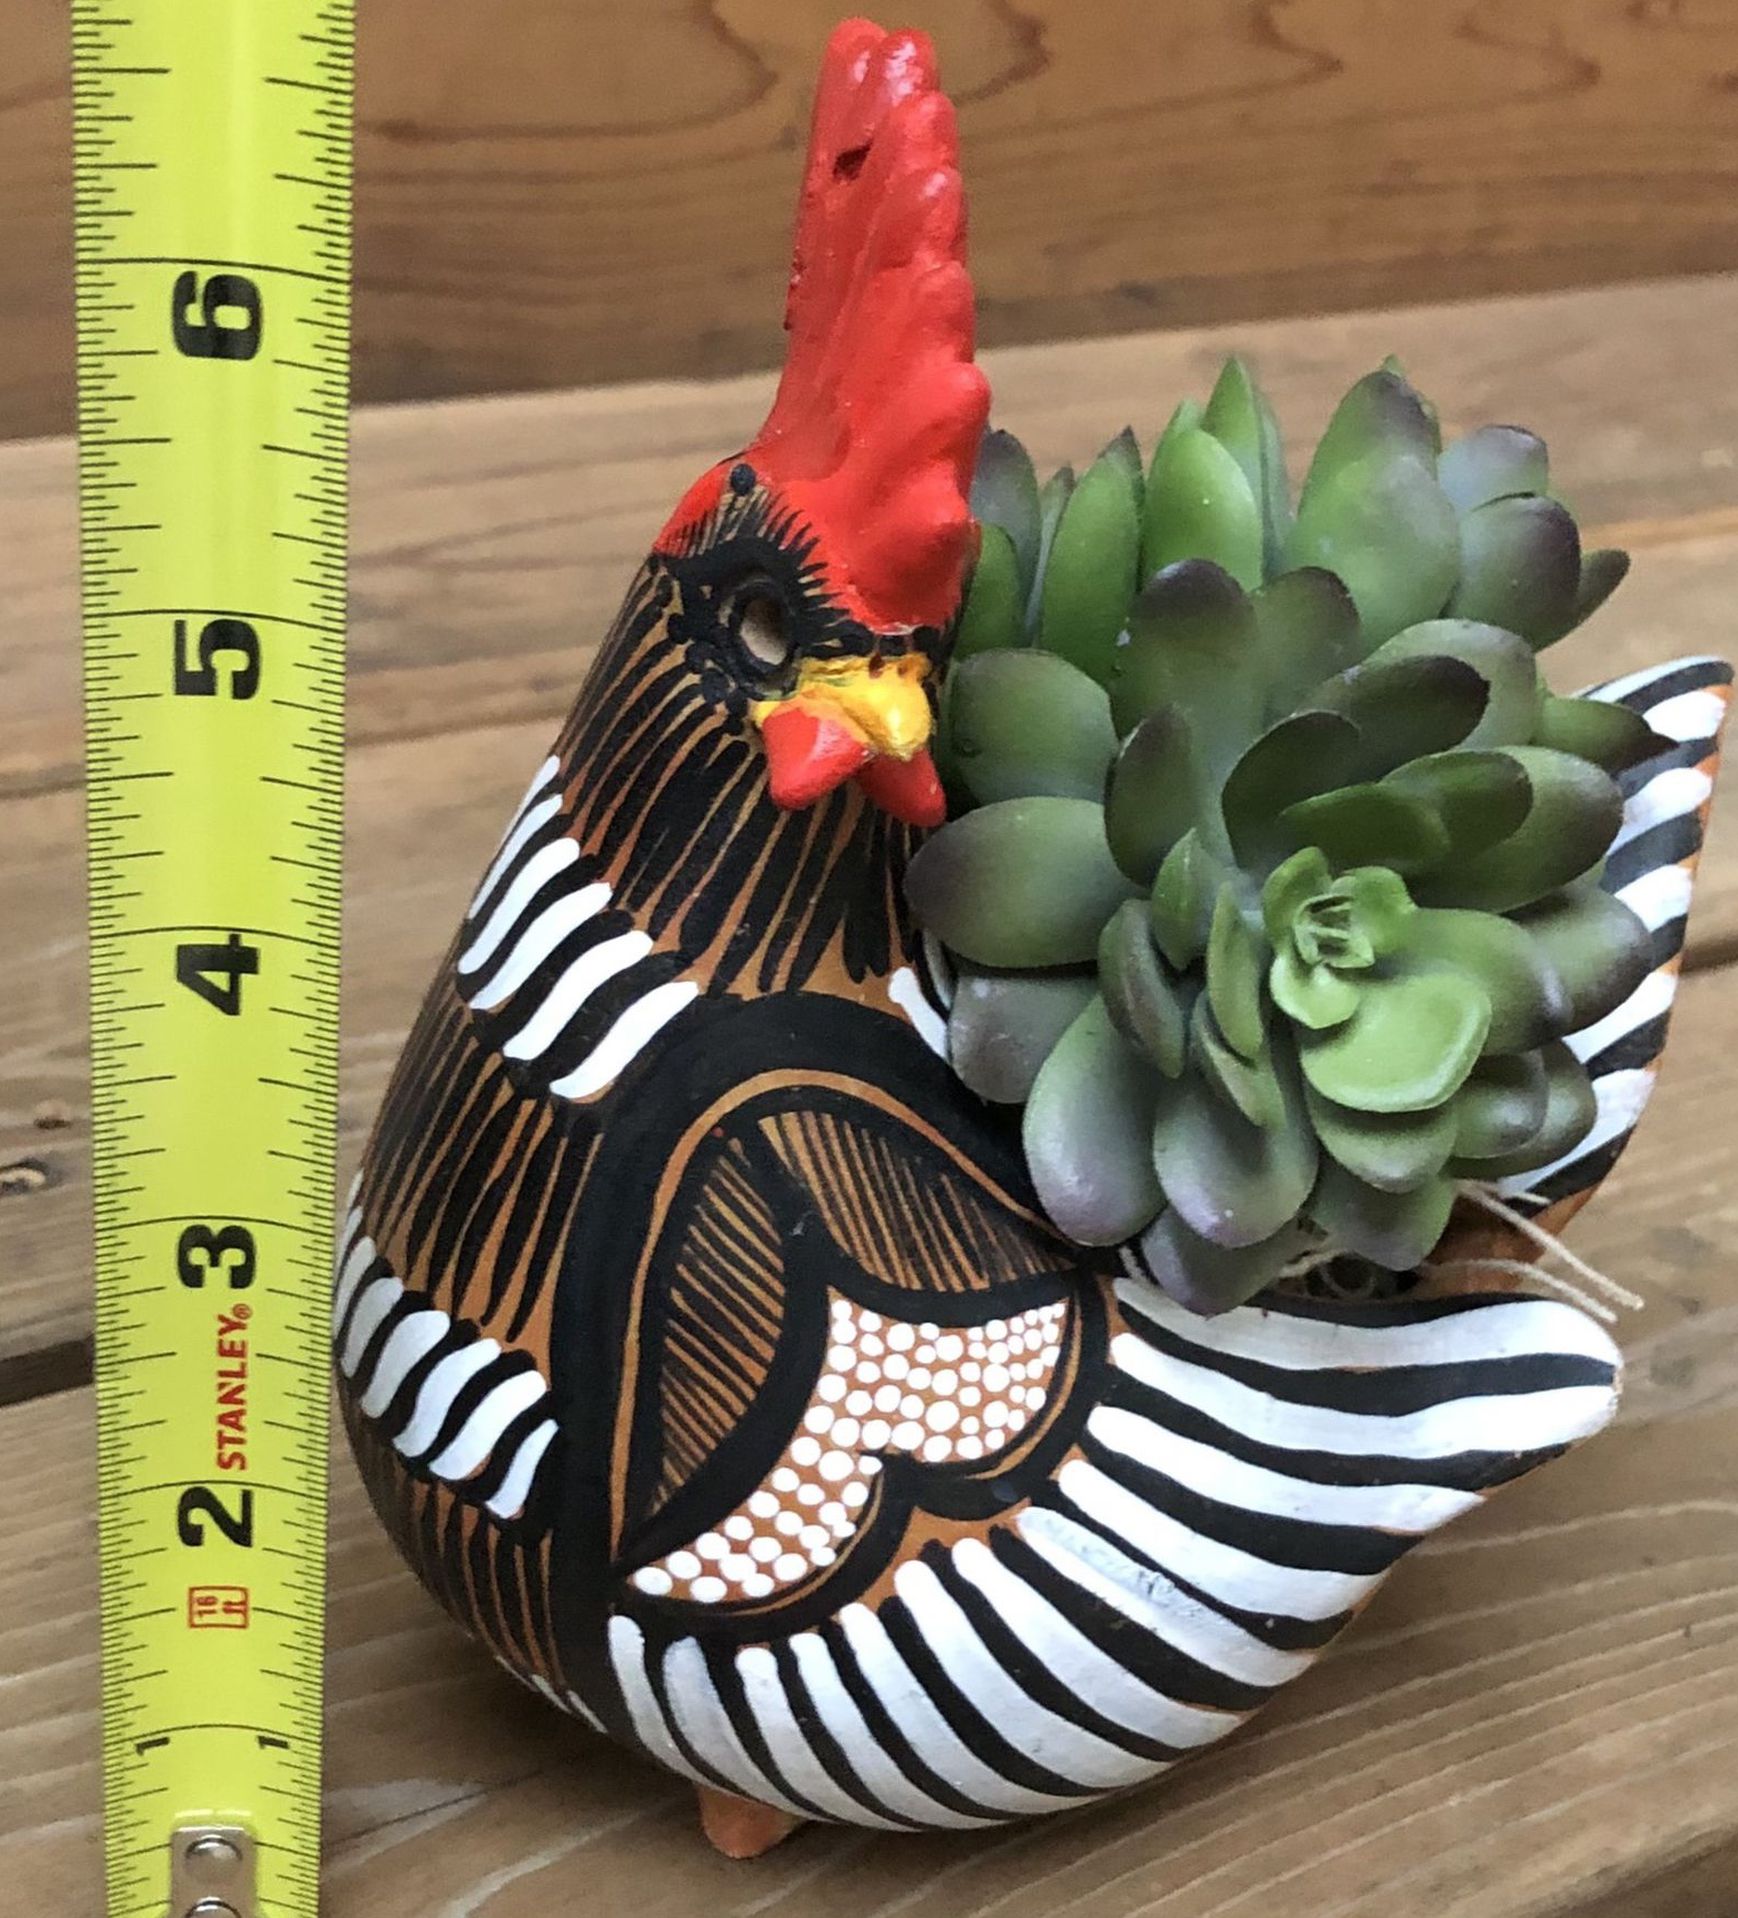 7” Tall Handmade And Hand Painted Rooster Planter $15.00